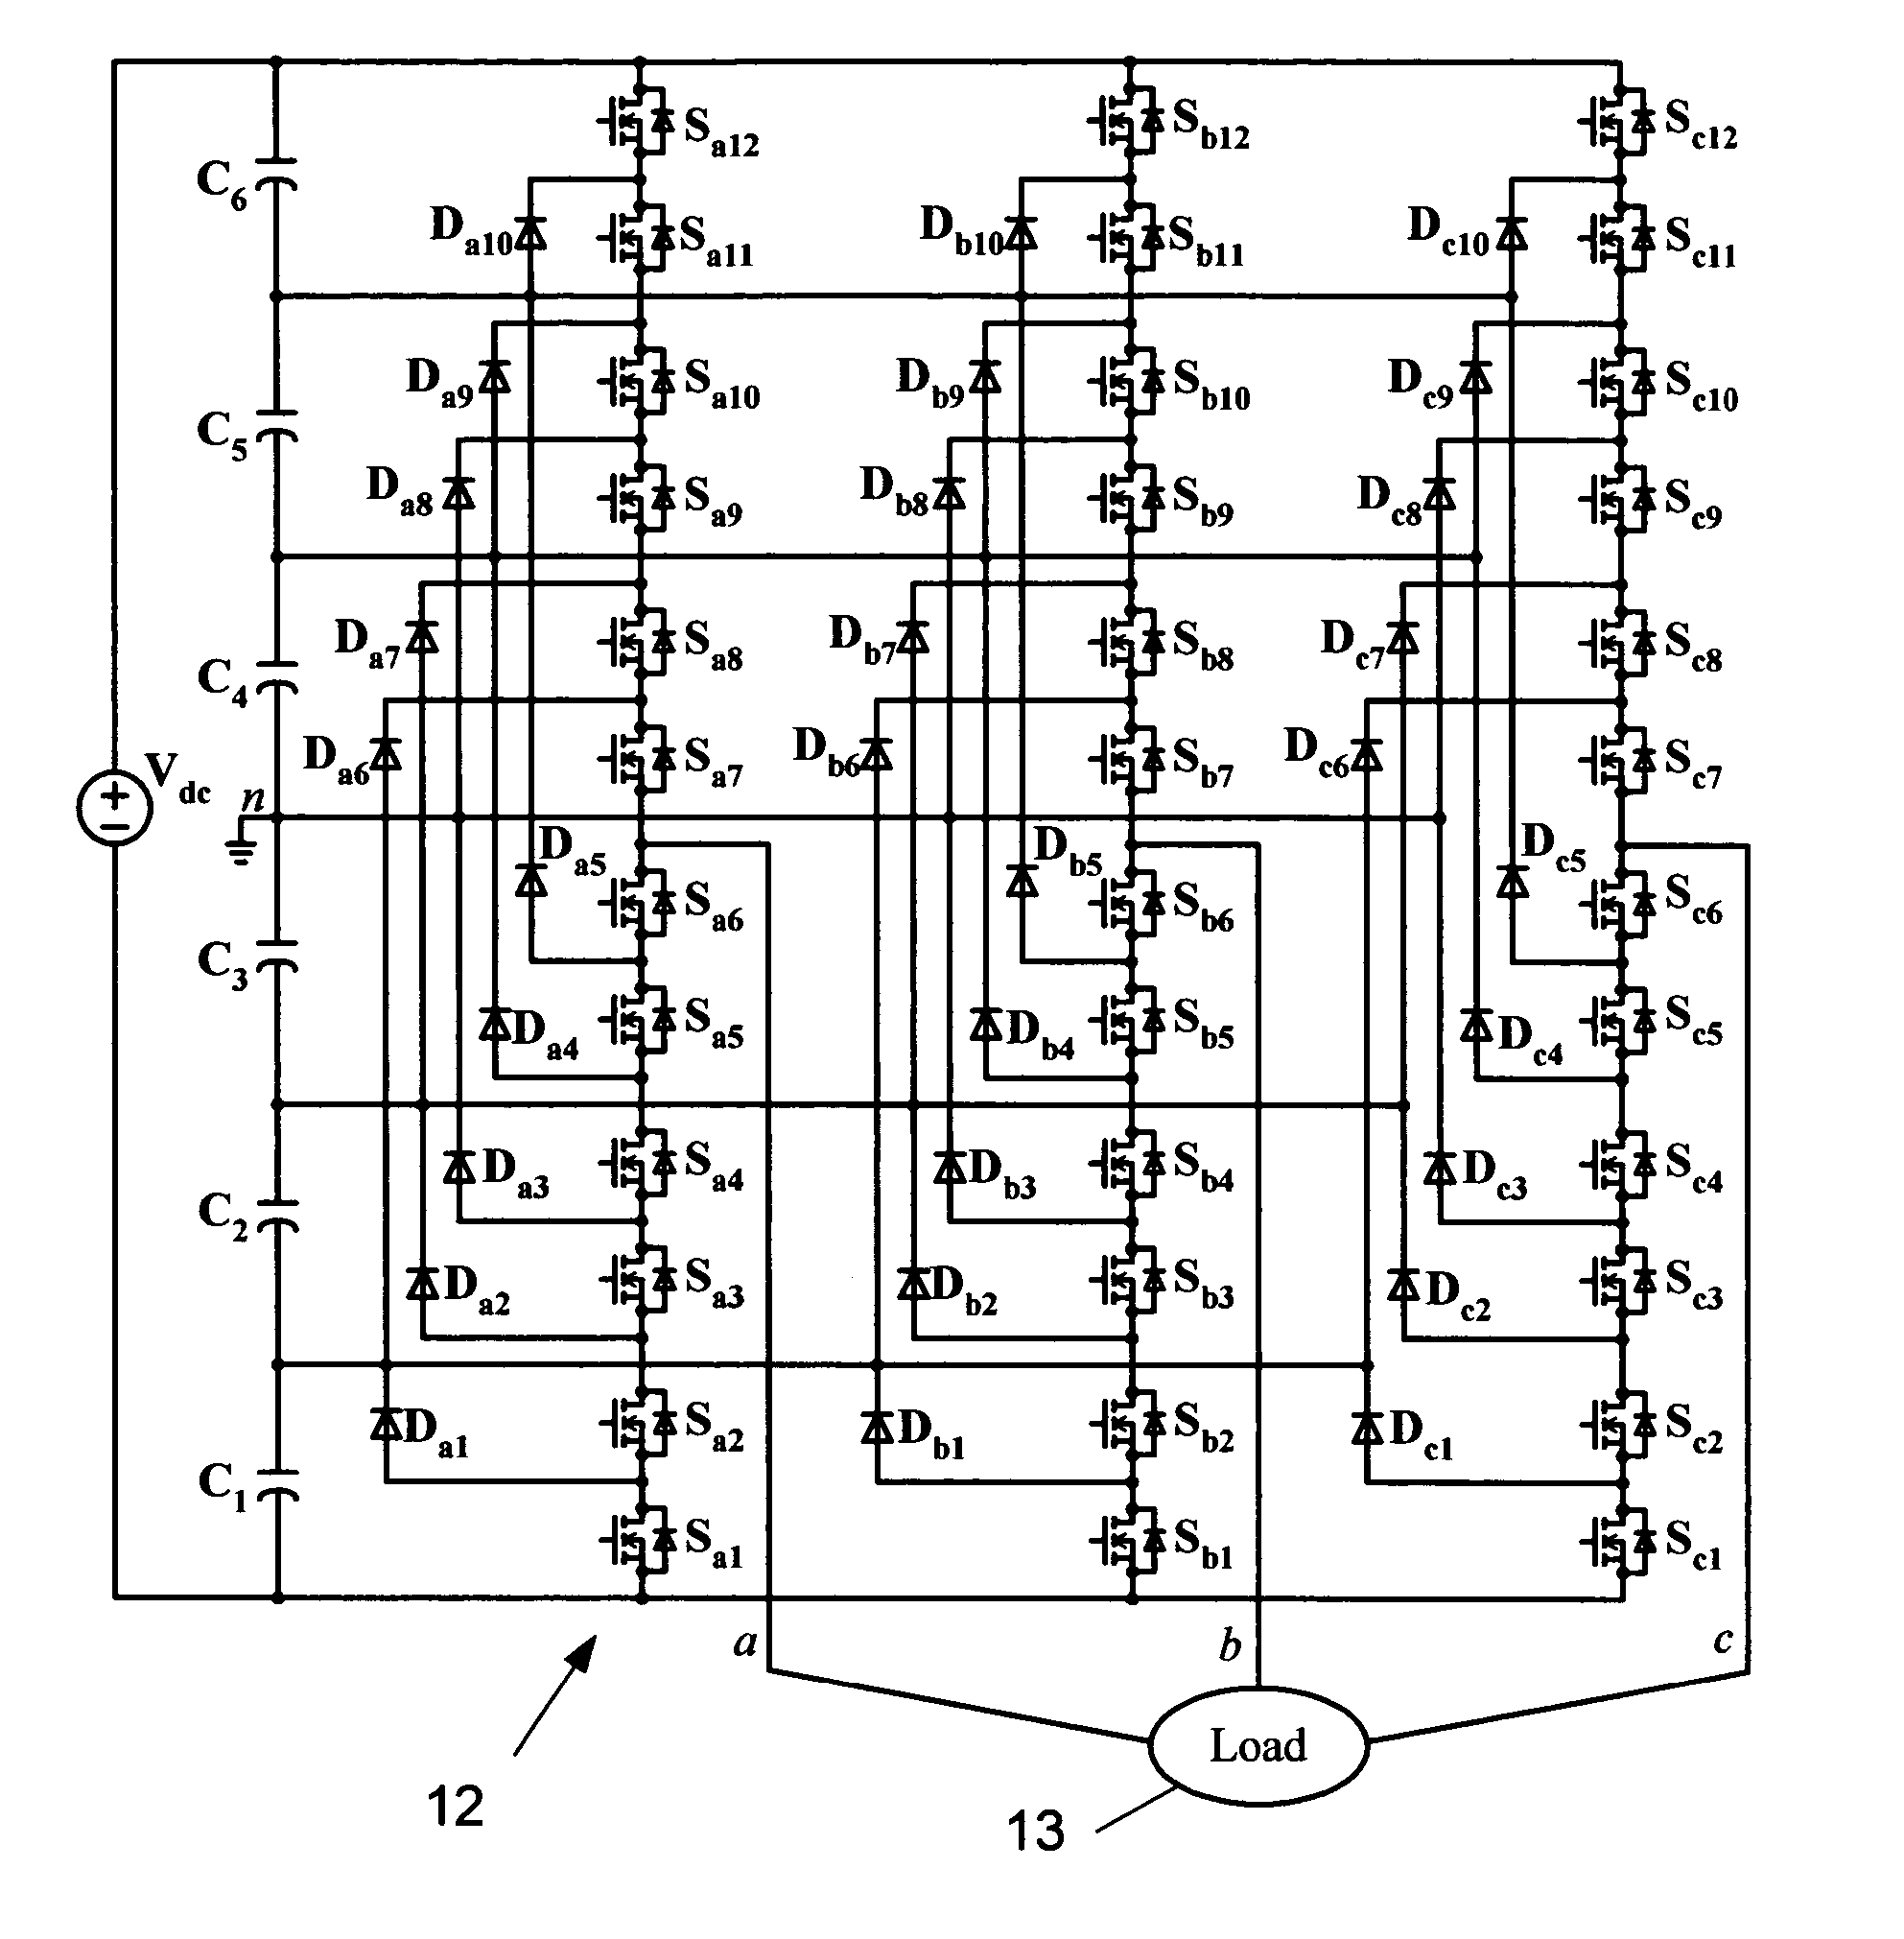 Multi-level DC bus inverter for providing sinusoidal and pwm electrical machine voltages